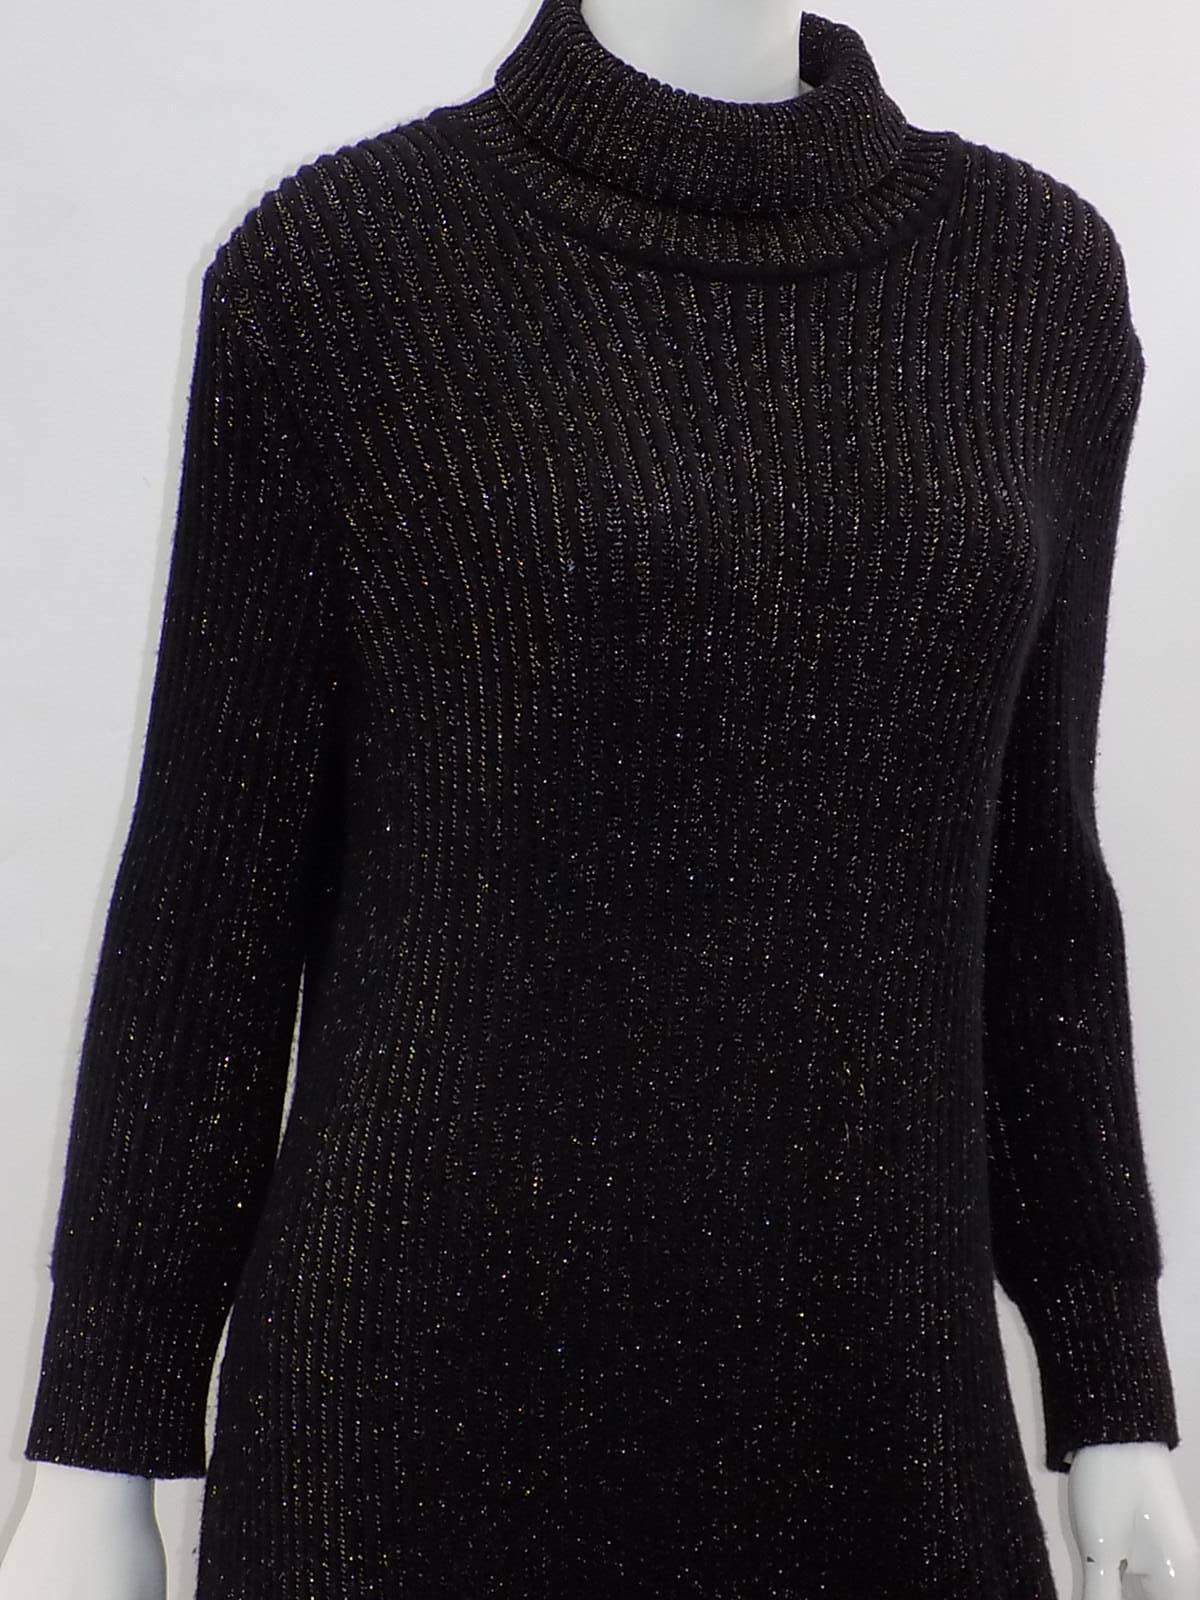 Women's or Men's Chanel  cashmere silk and lurex l sweater dress